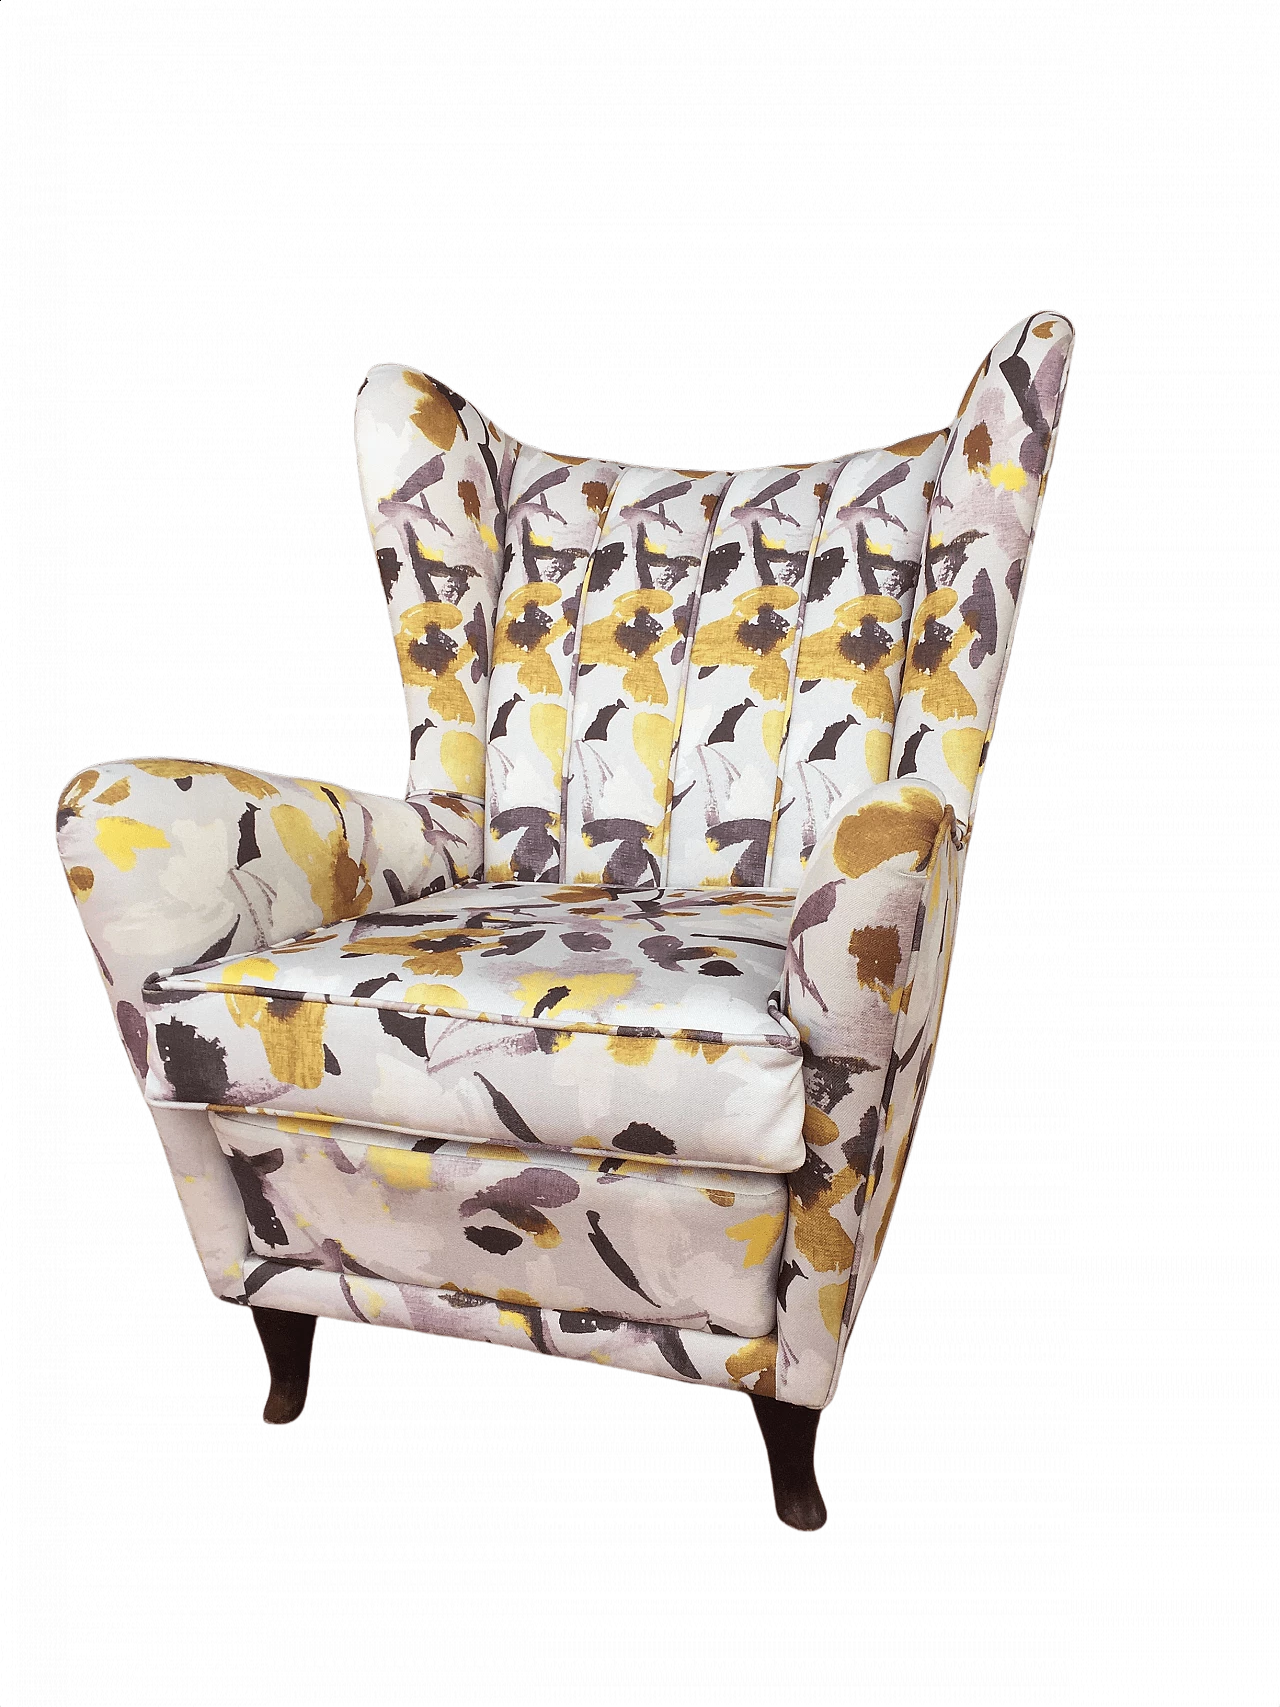 Bergere-type armchair in floral fabric, 20th century 1447617